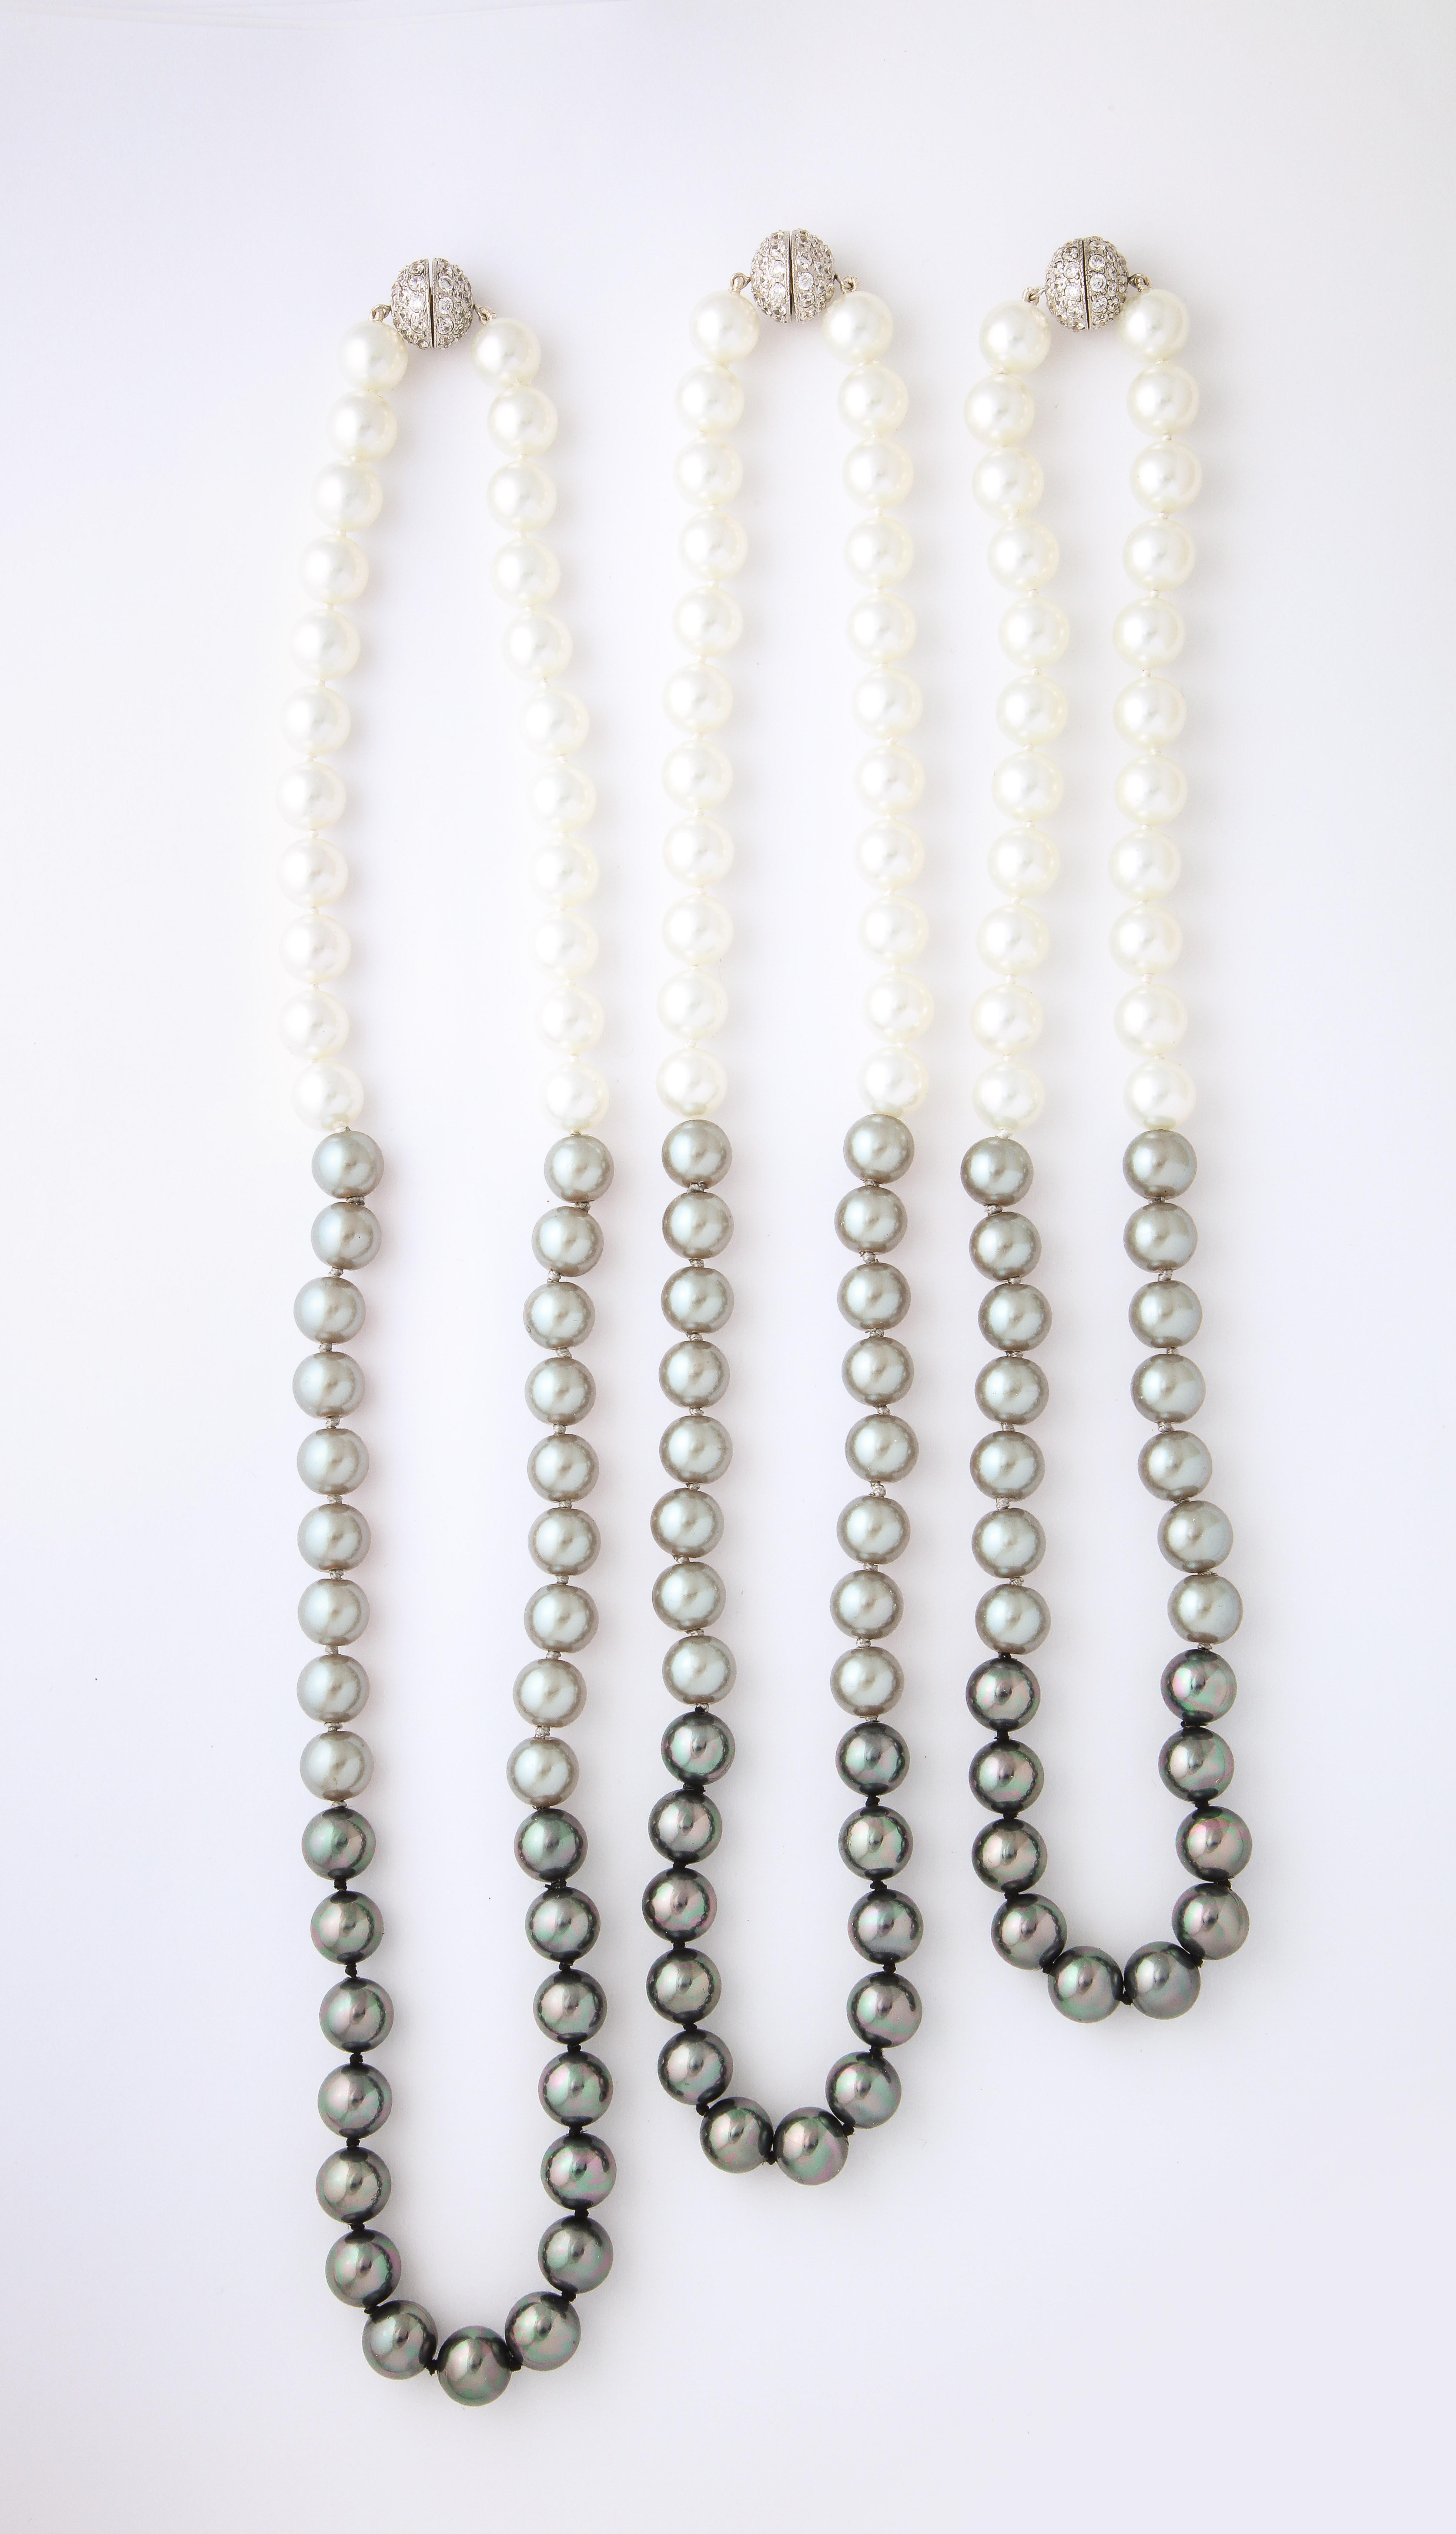 Stunning 3 Single Rows Shaded 10MM South Sea Faux Pearls Necklace Mint Never Worn CZ Set Sterling Ball Clasps Can Be Worn As You Like-One, Two, Three. Stunning Chic Look
24inch, 26inch and 28inch